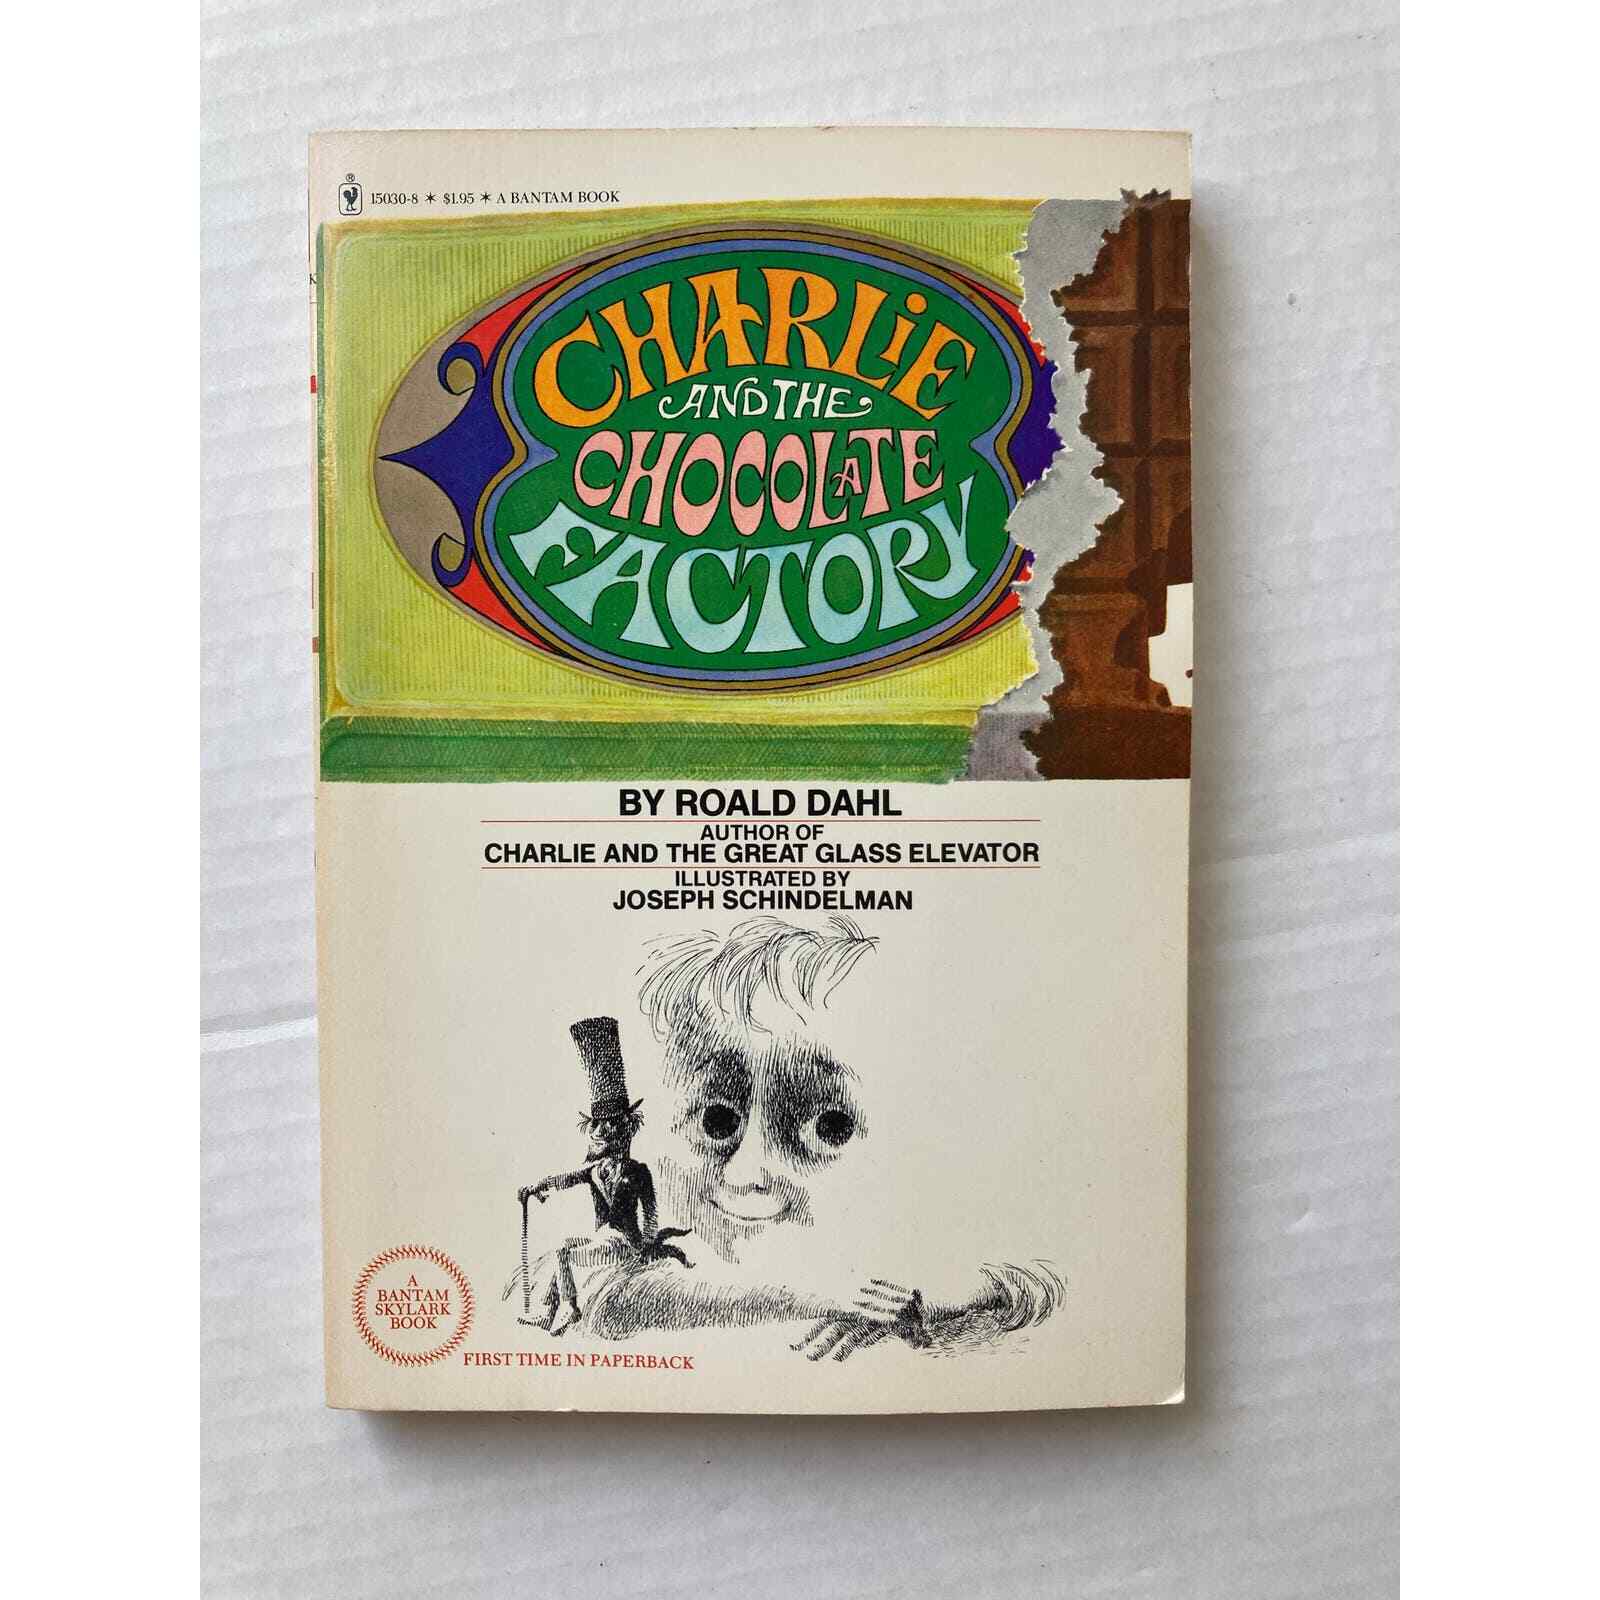 Charlie and the Chocolate Factory by Roald Dahl- Bantam Paperback 1964 Vintage